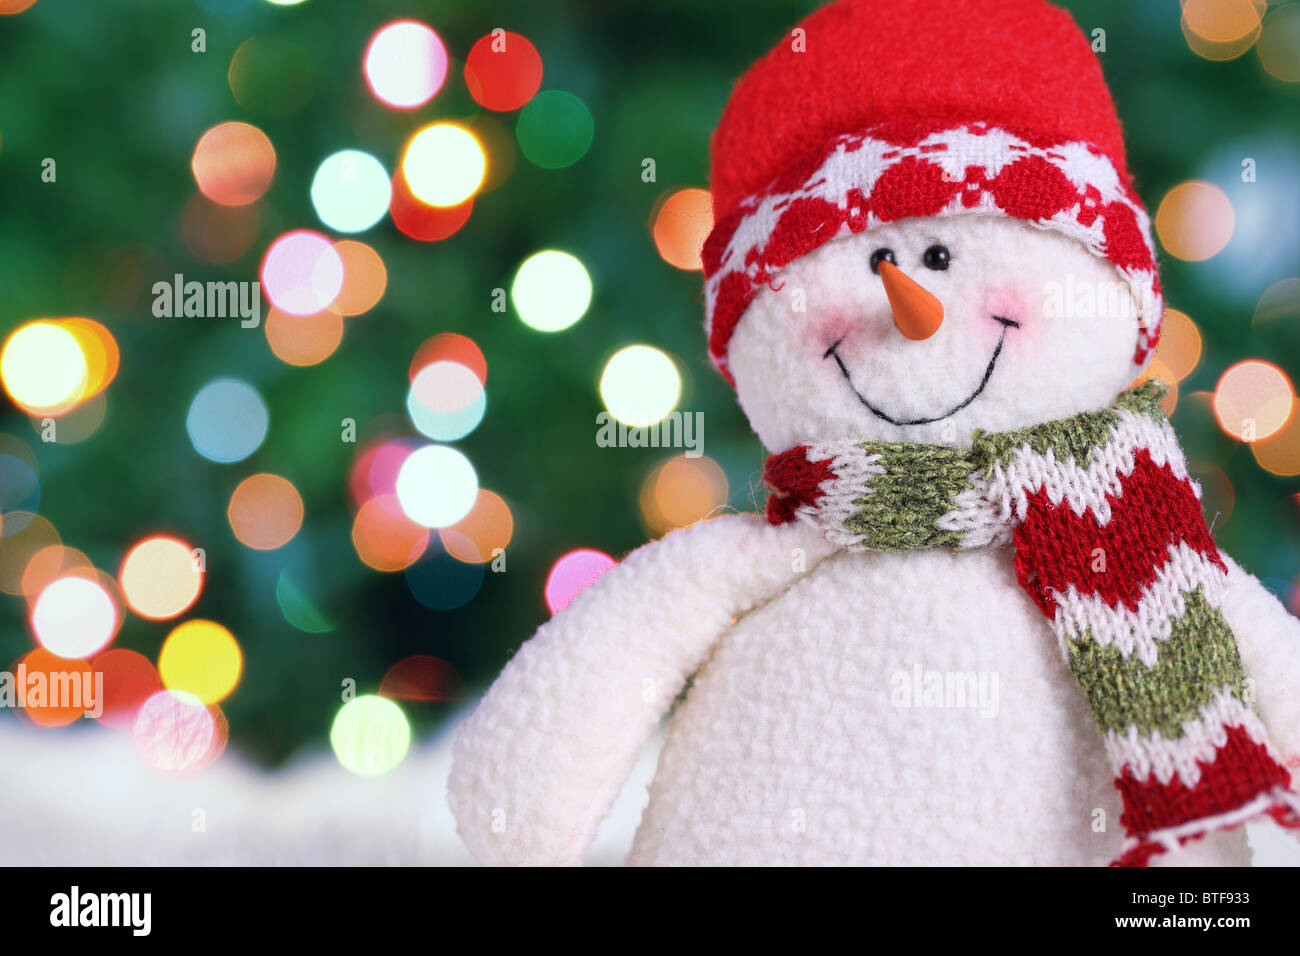 Festive snowman with Christmas light background Stock Photo